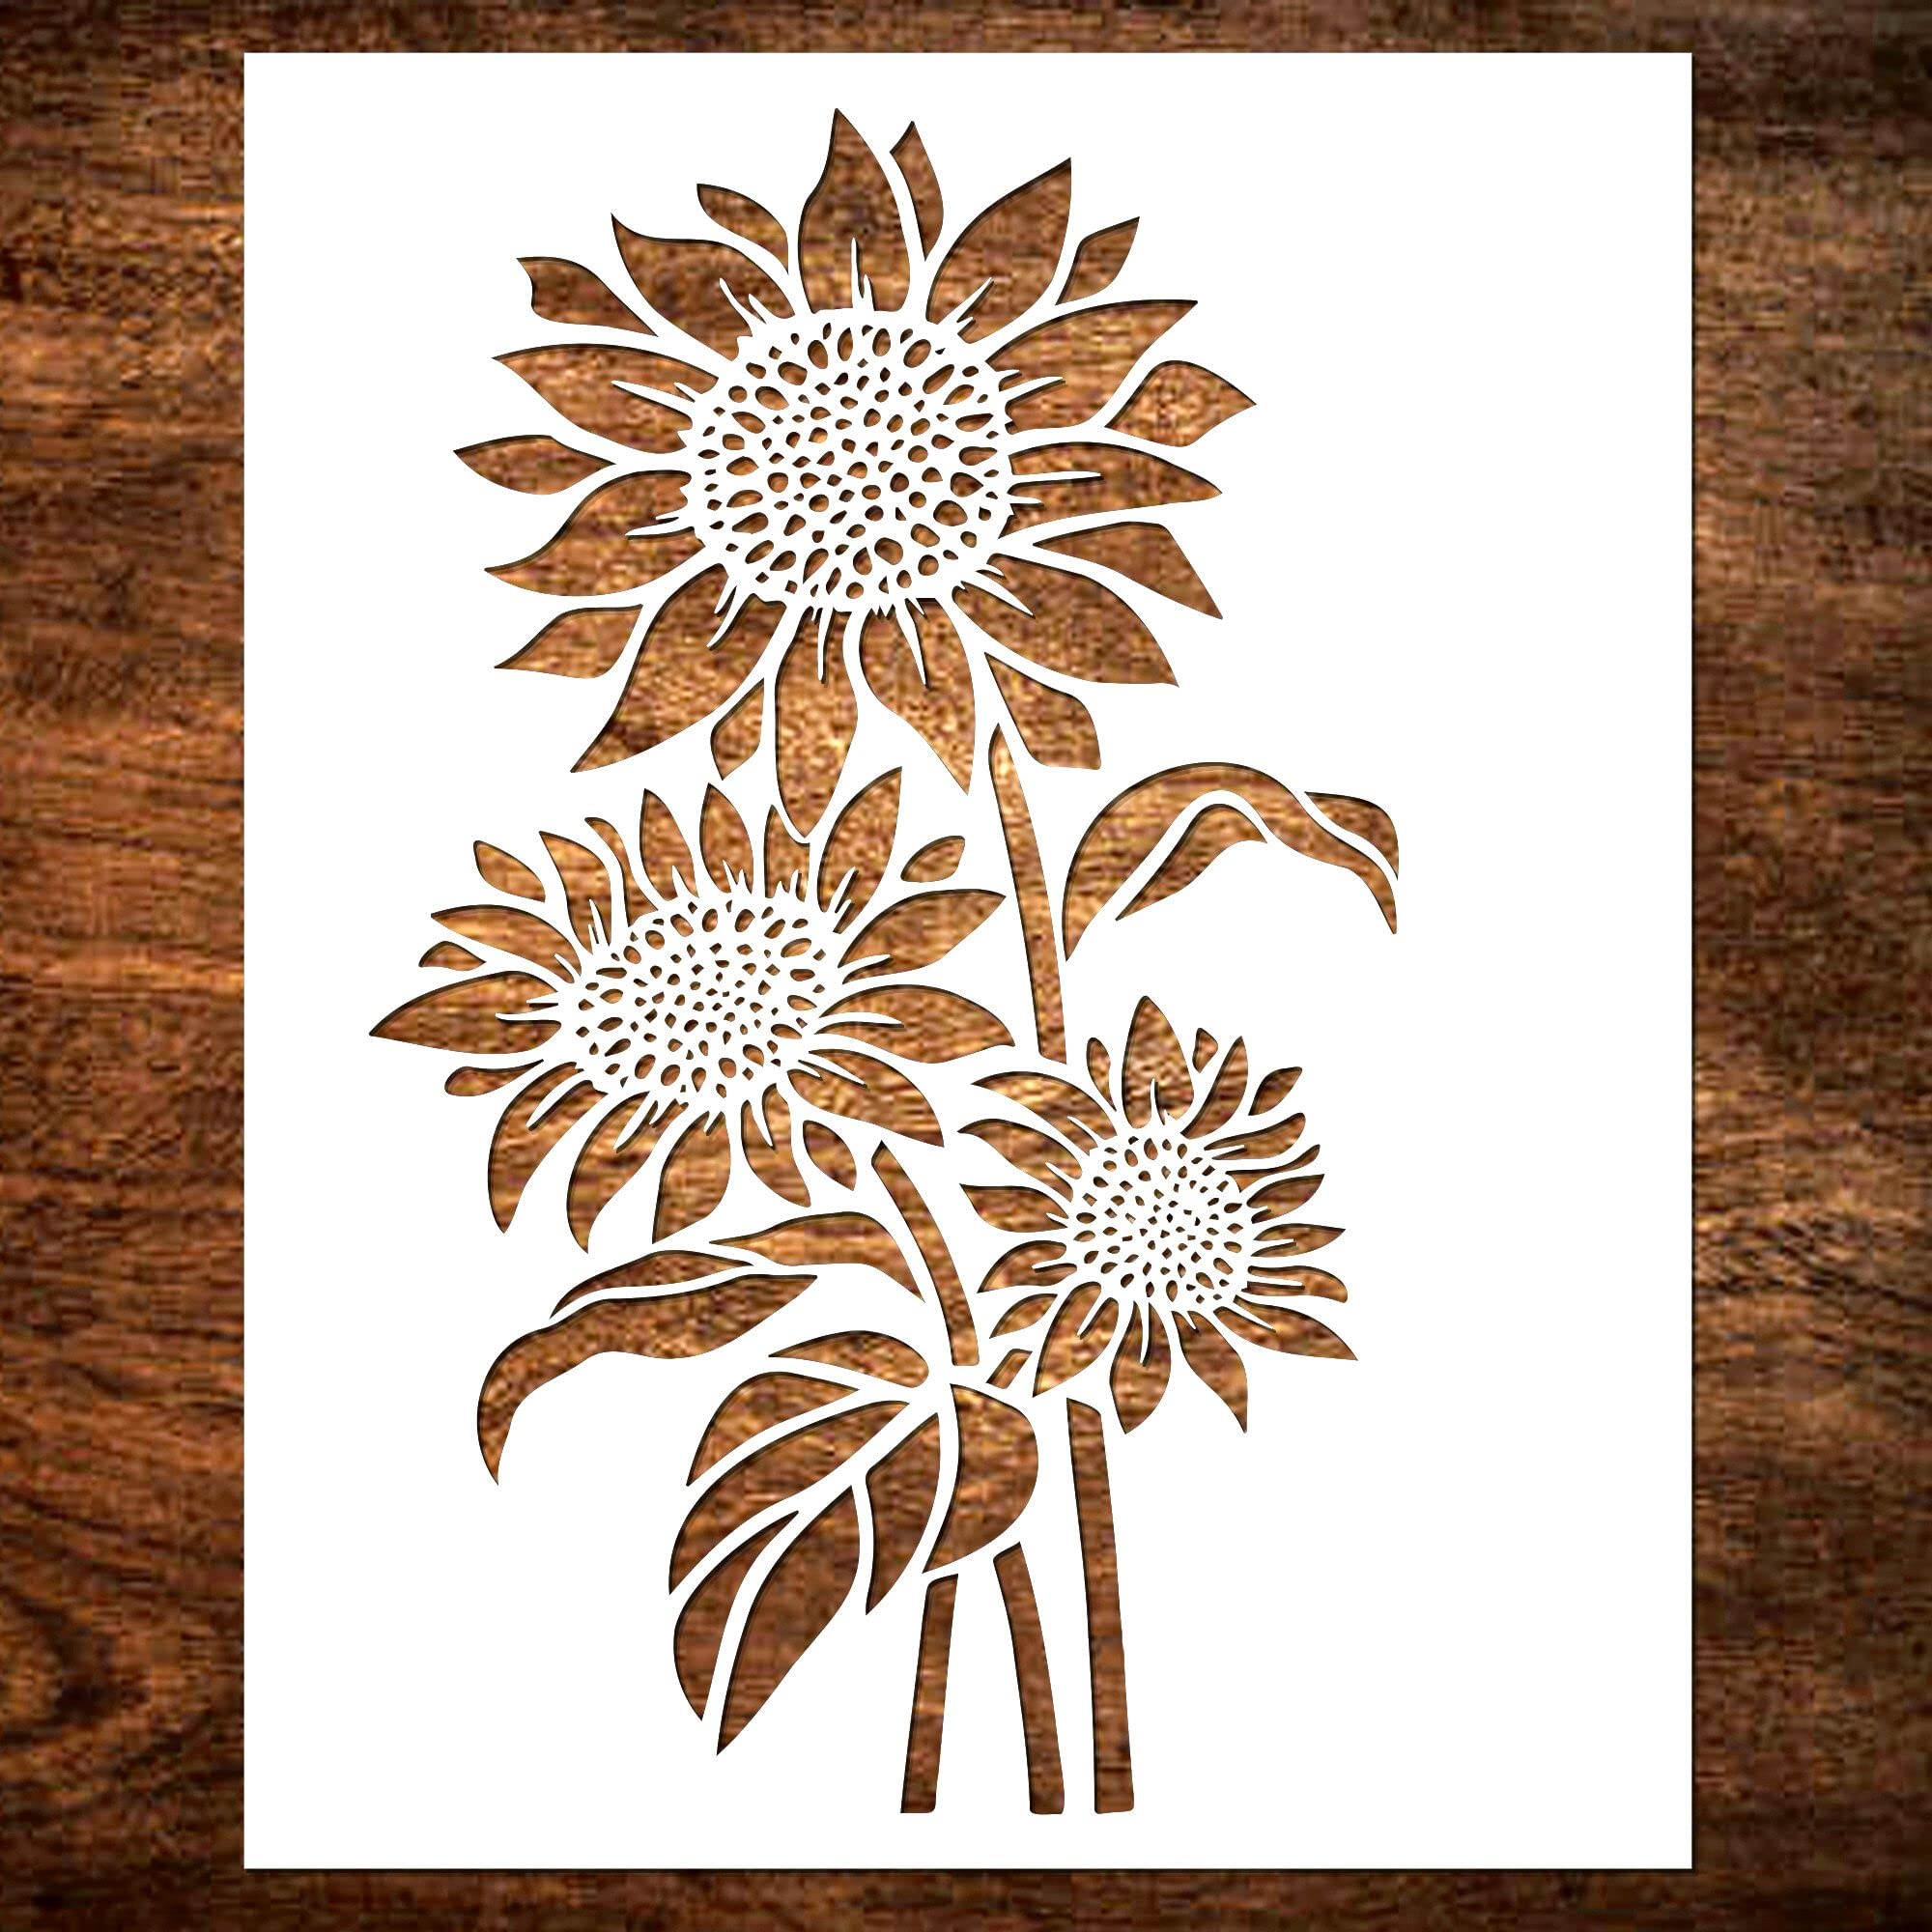 Stencils for Painting on Wood,Wall,Home Decor,A4 29cm Big Flowers Texture  DIY Reusable Stencils Art Templates for Painting on Wood,Wall Style 13